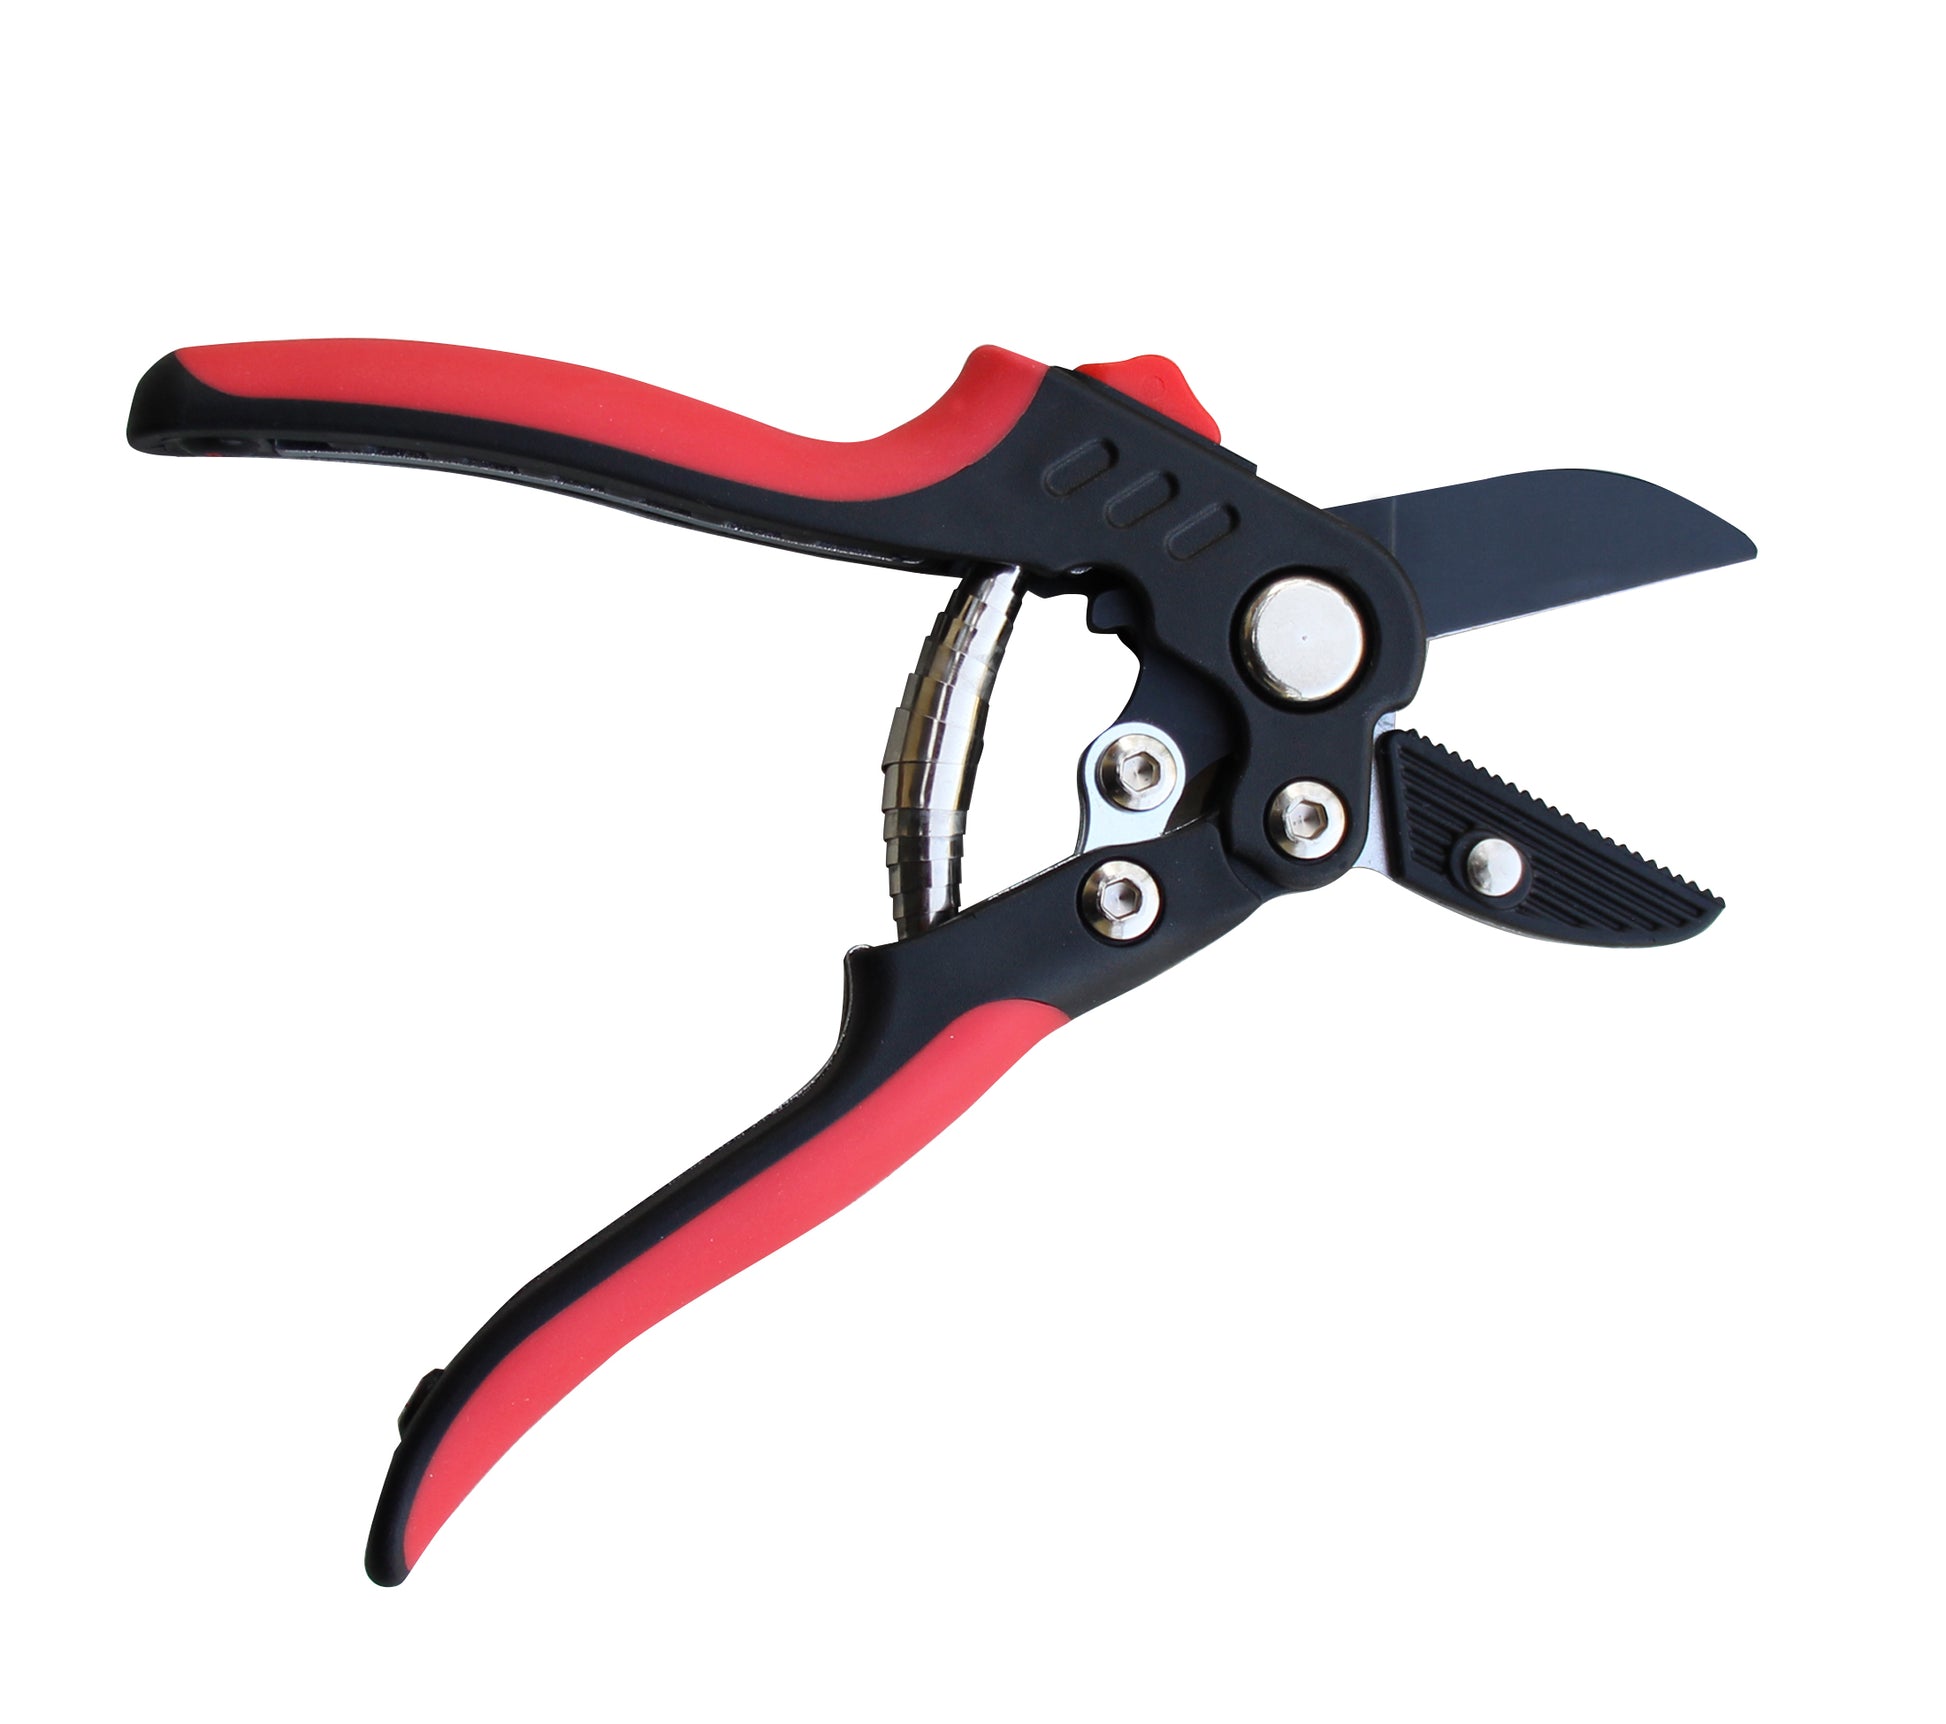 TABOR TOOLS S821A Pruning Shears for Small/Medium Size Hands – Tabor Tools